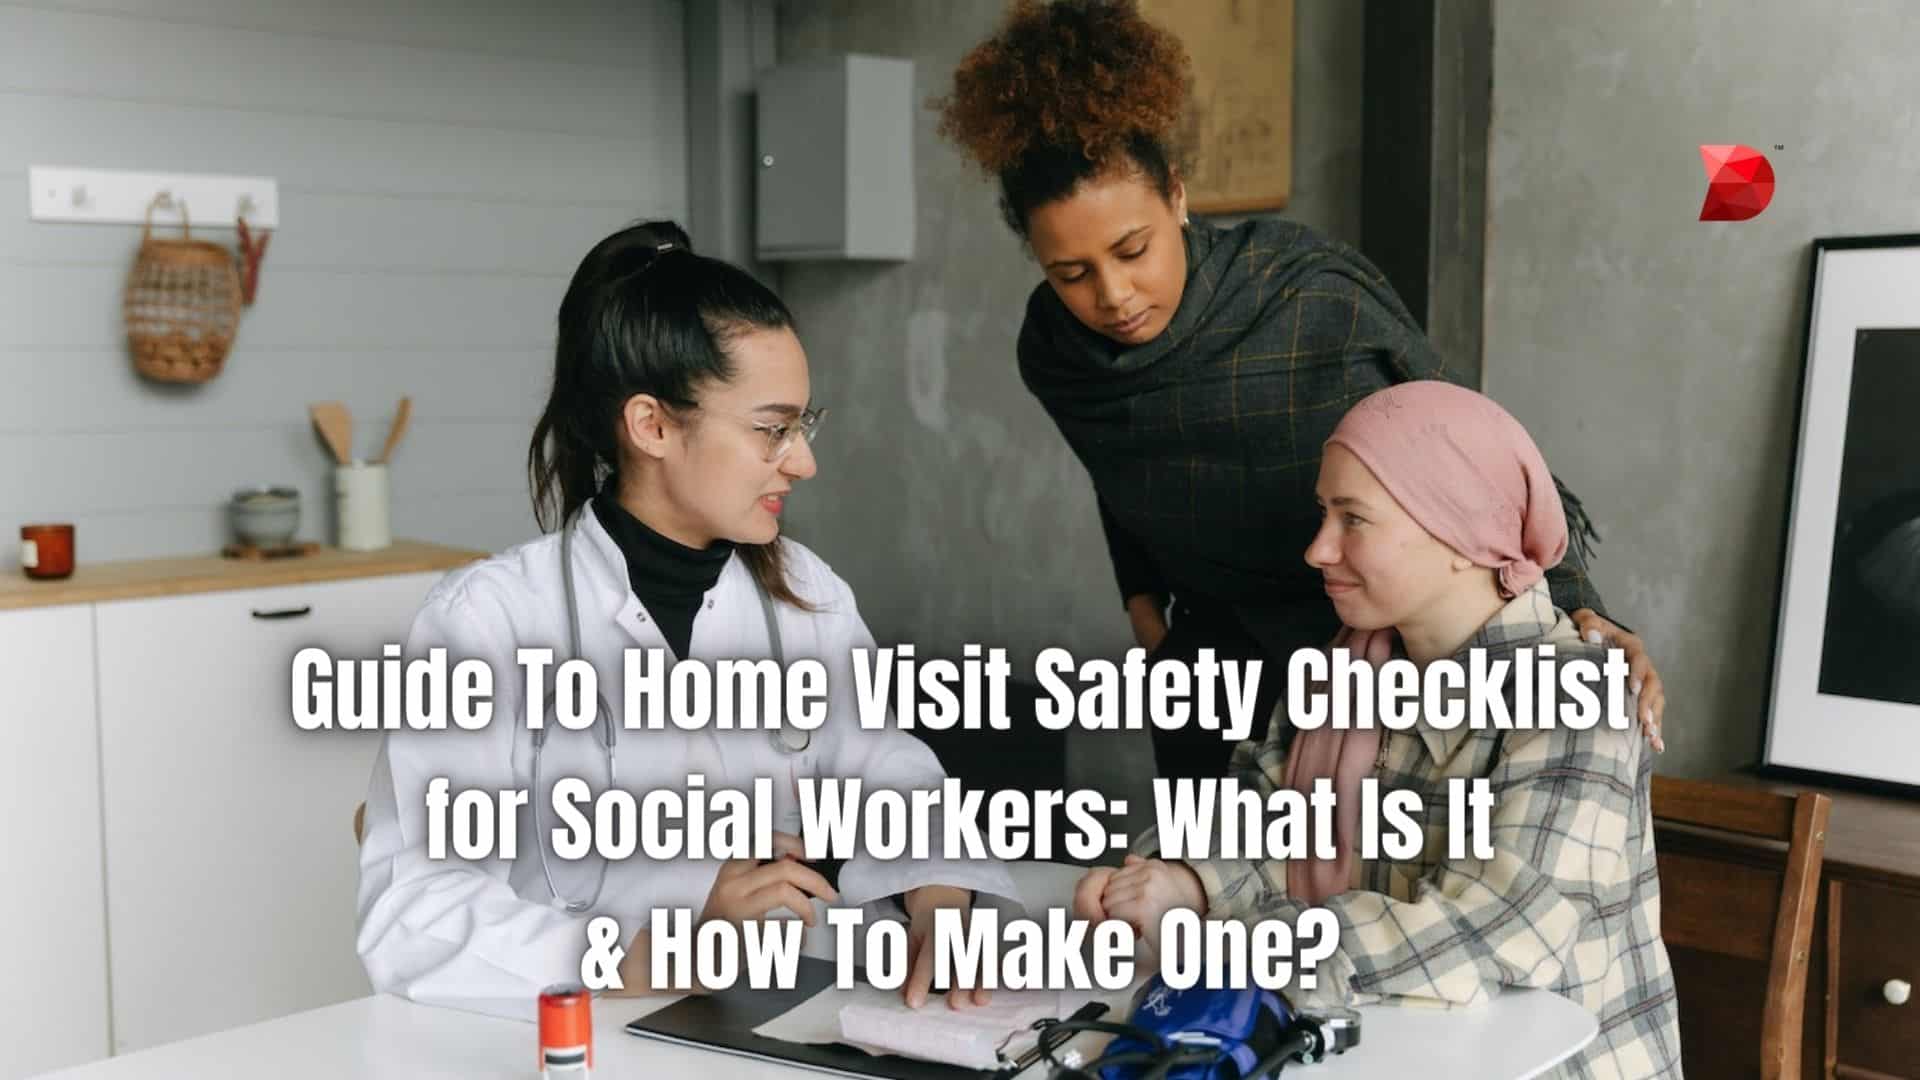 Guide To Home Visit Safety Checklist for Social Workers What Is It & How To Make One